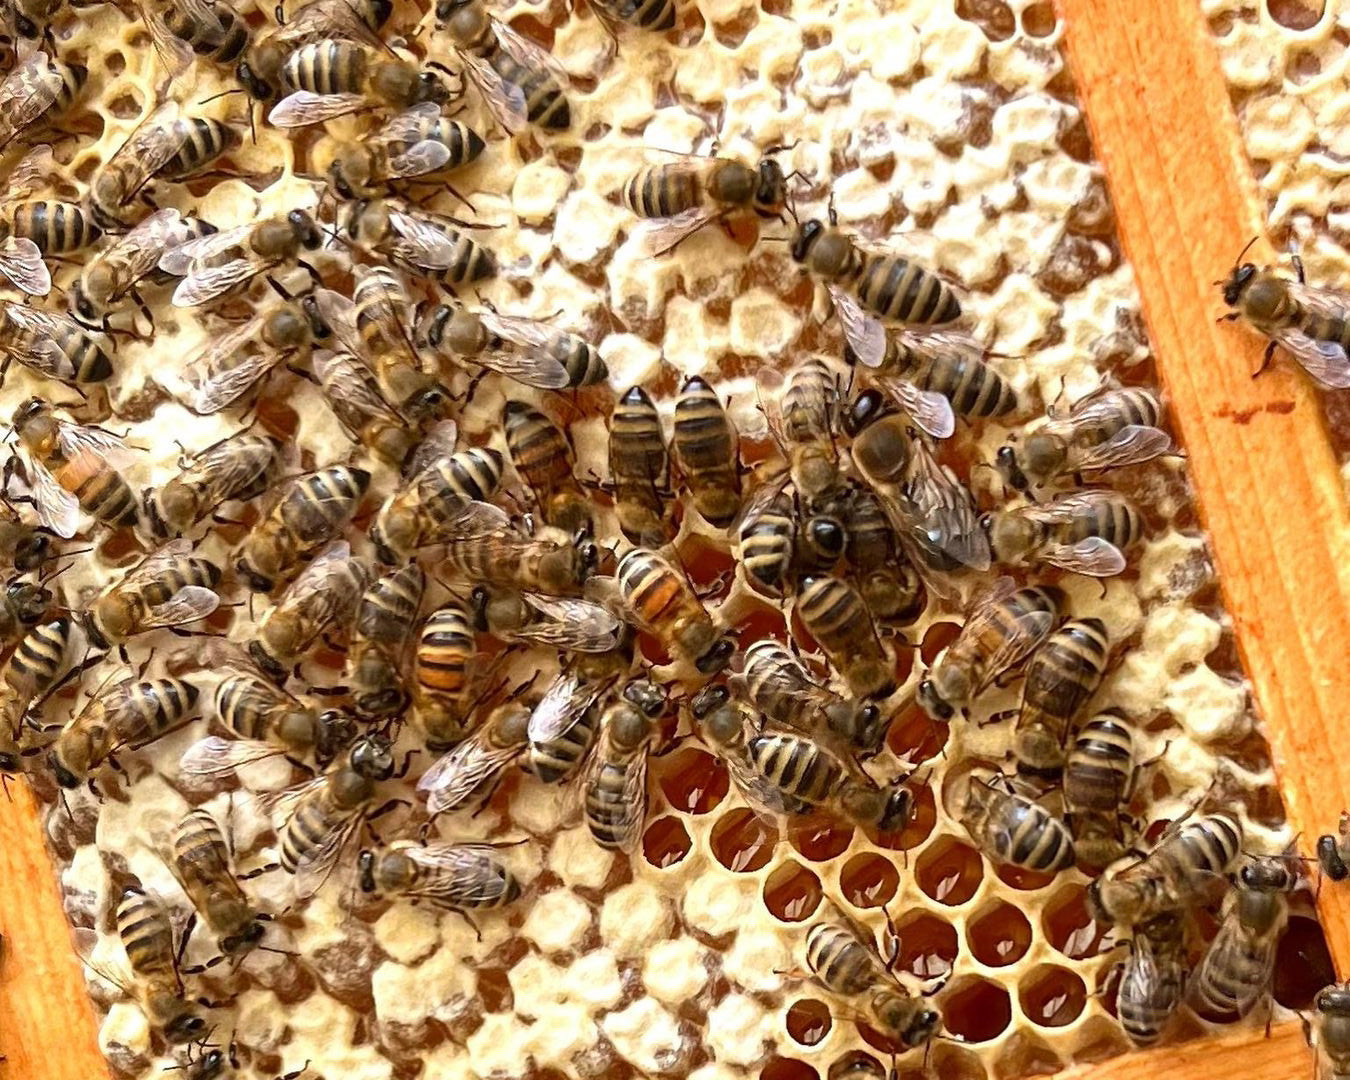 Fall Beekeeping Checklist To Help The Bees Winterize 